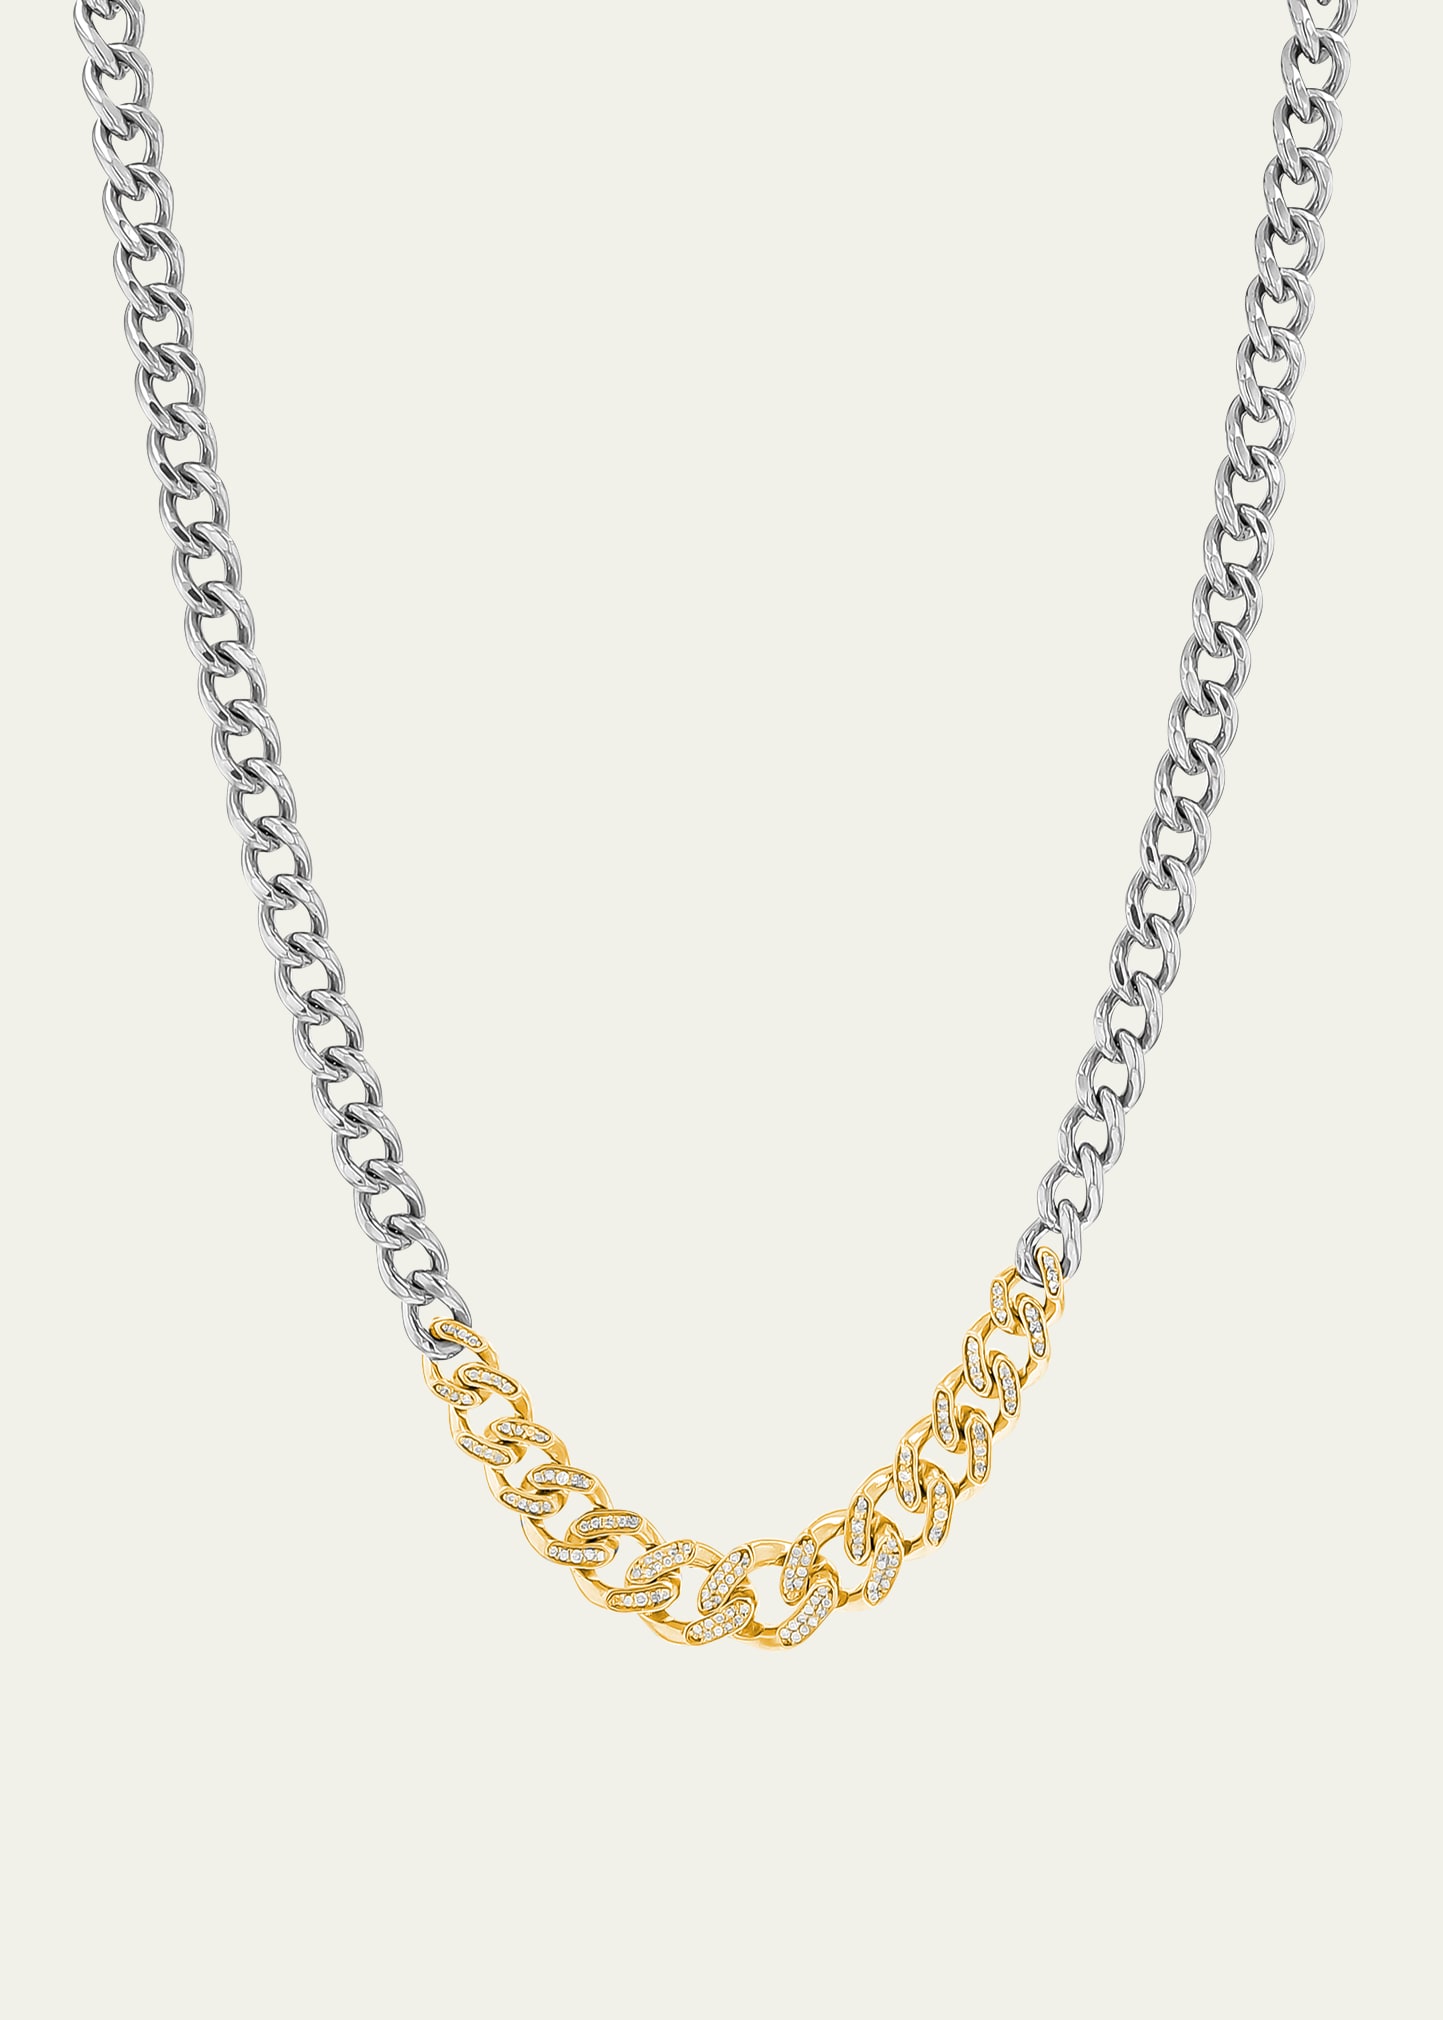 14K Pave Diamond and Sterling Silver Tapered Link Curb Chain Necklace